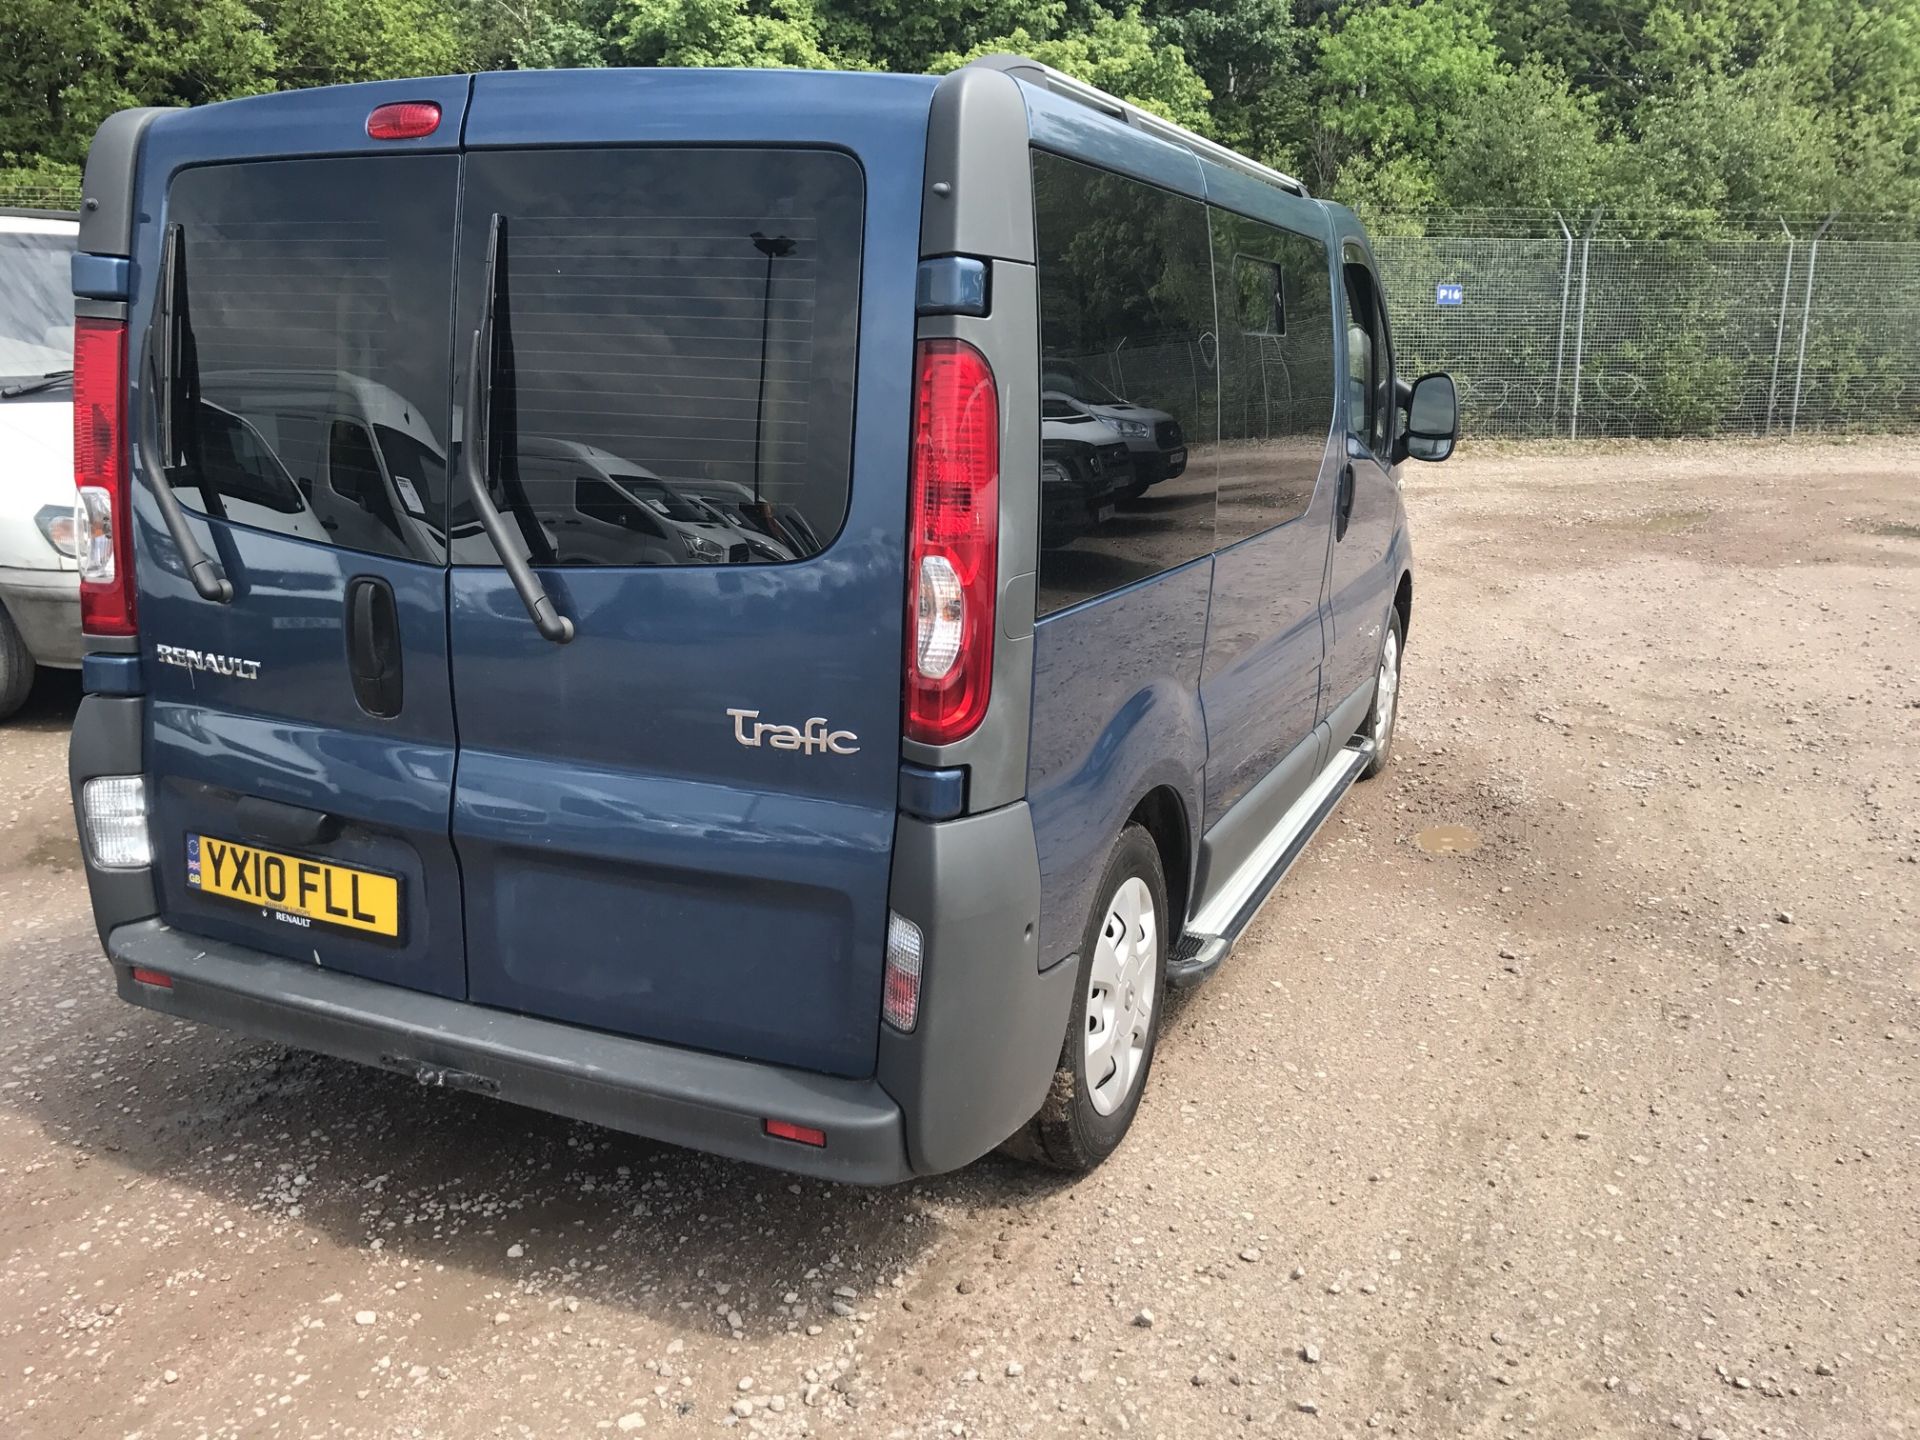 2010 10 REG RENAULT TRAFIC DISABLED ACCESS MINIBUS DIESEL AUTOMATIC 92k MILES - Image 10 of 12